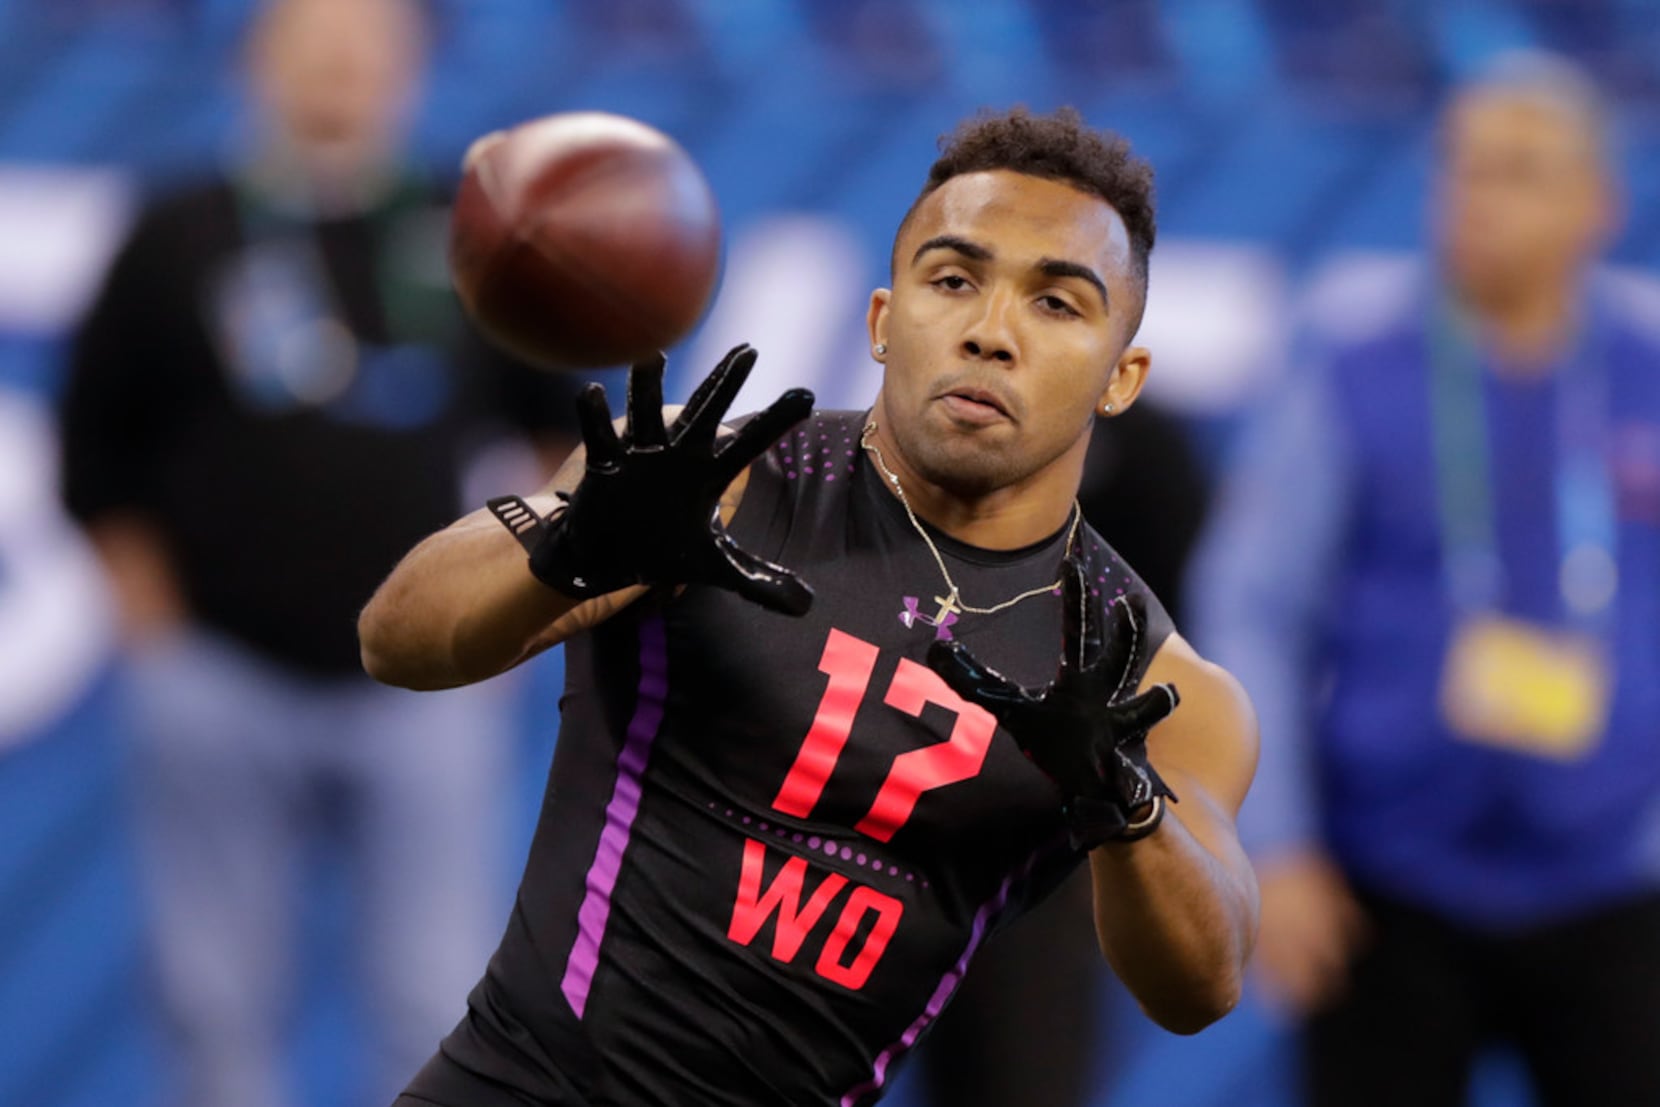 Christian Kirk says he doesn't play football to be average